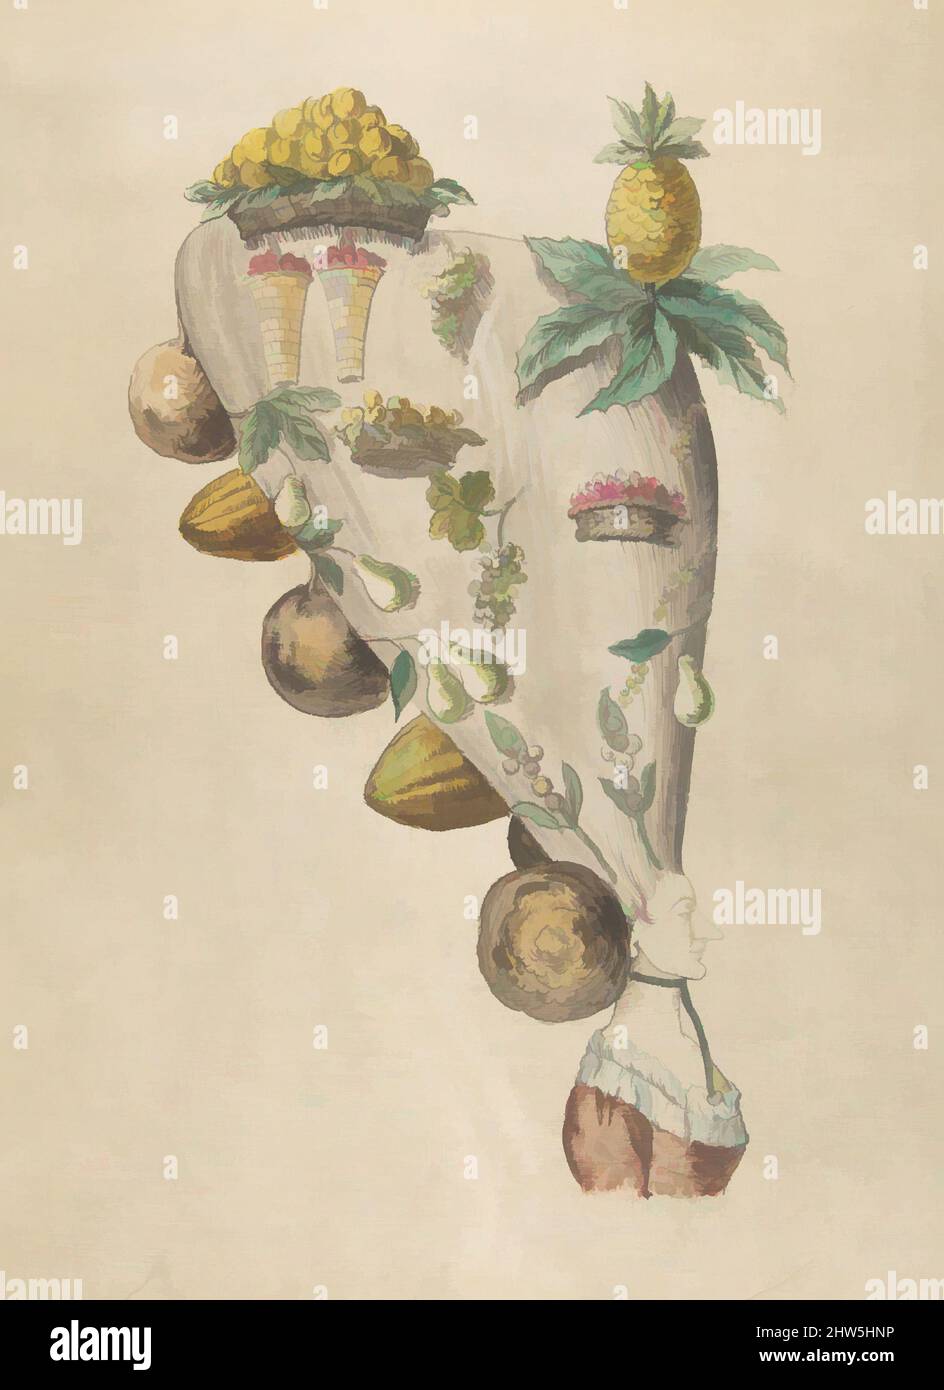 Art inspired by Fantastic Hairdresses with Fruit and Vegetable Motifs, 18th century, Watercolor on canvas laid down on board, 17 1/4 x 22 in. (43.8 x 55.9 cm), Drawings, Anonymous, French, 18th century, Classic works modernized by Artotop with a splash of modernity. Shapes, color and value, eye-catching visual impact on art. Emotions through freedom of artworks in a contemporary way. A timeless message pursuing a wildly creative new direction. Artists turning to the digital medium and creating the Artotop NFT Stock Photo